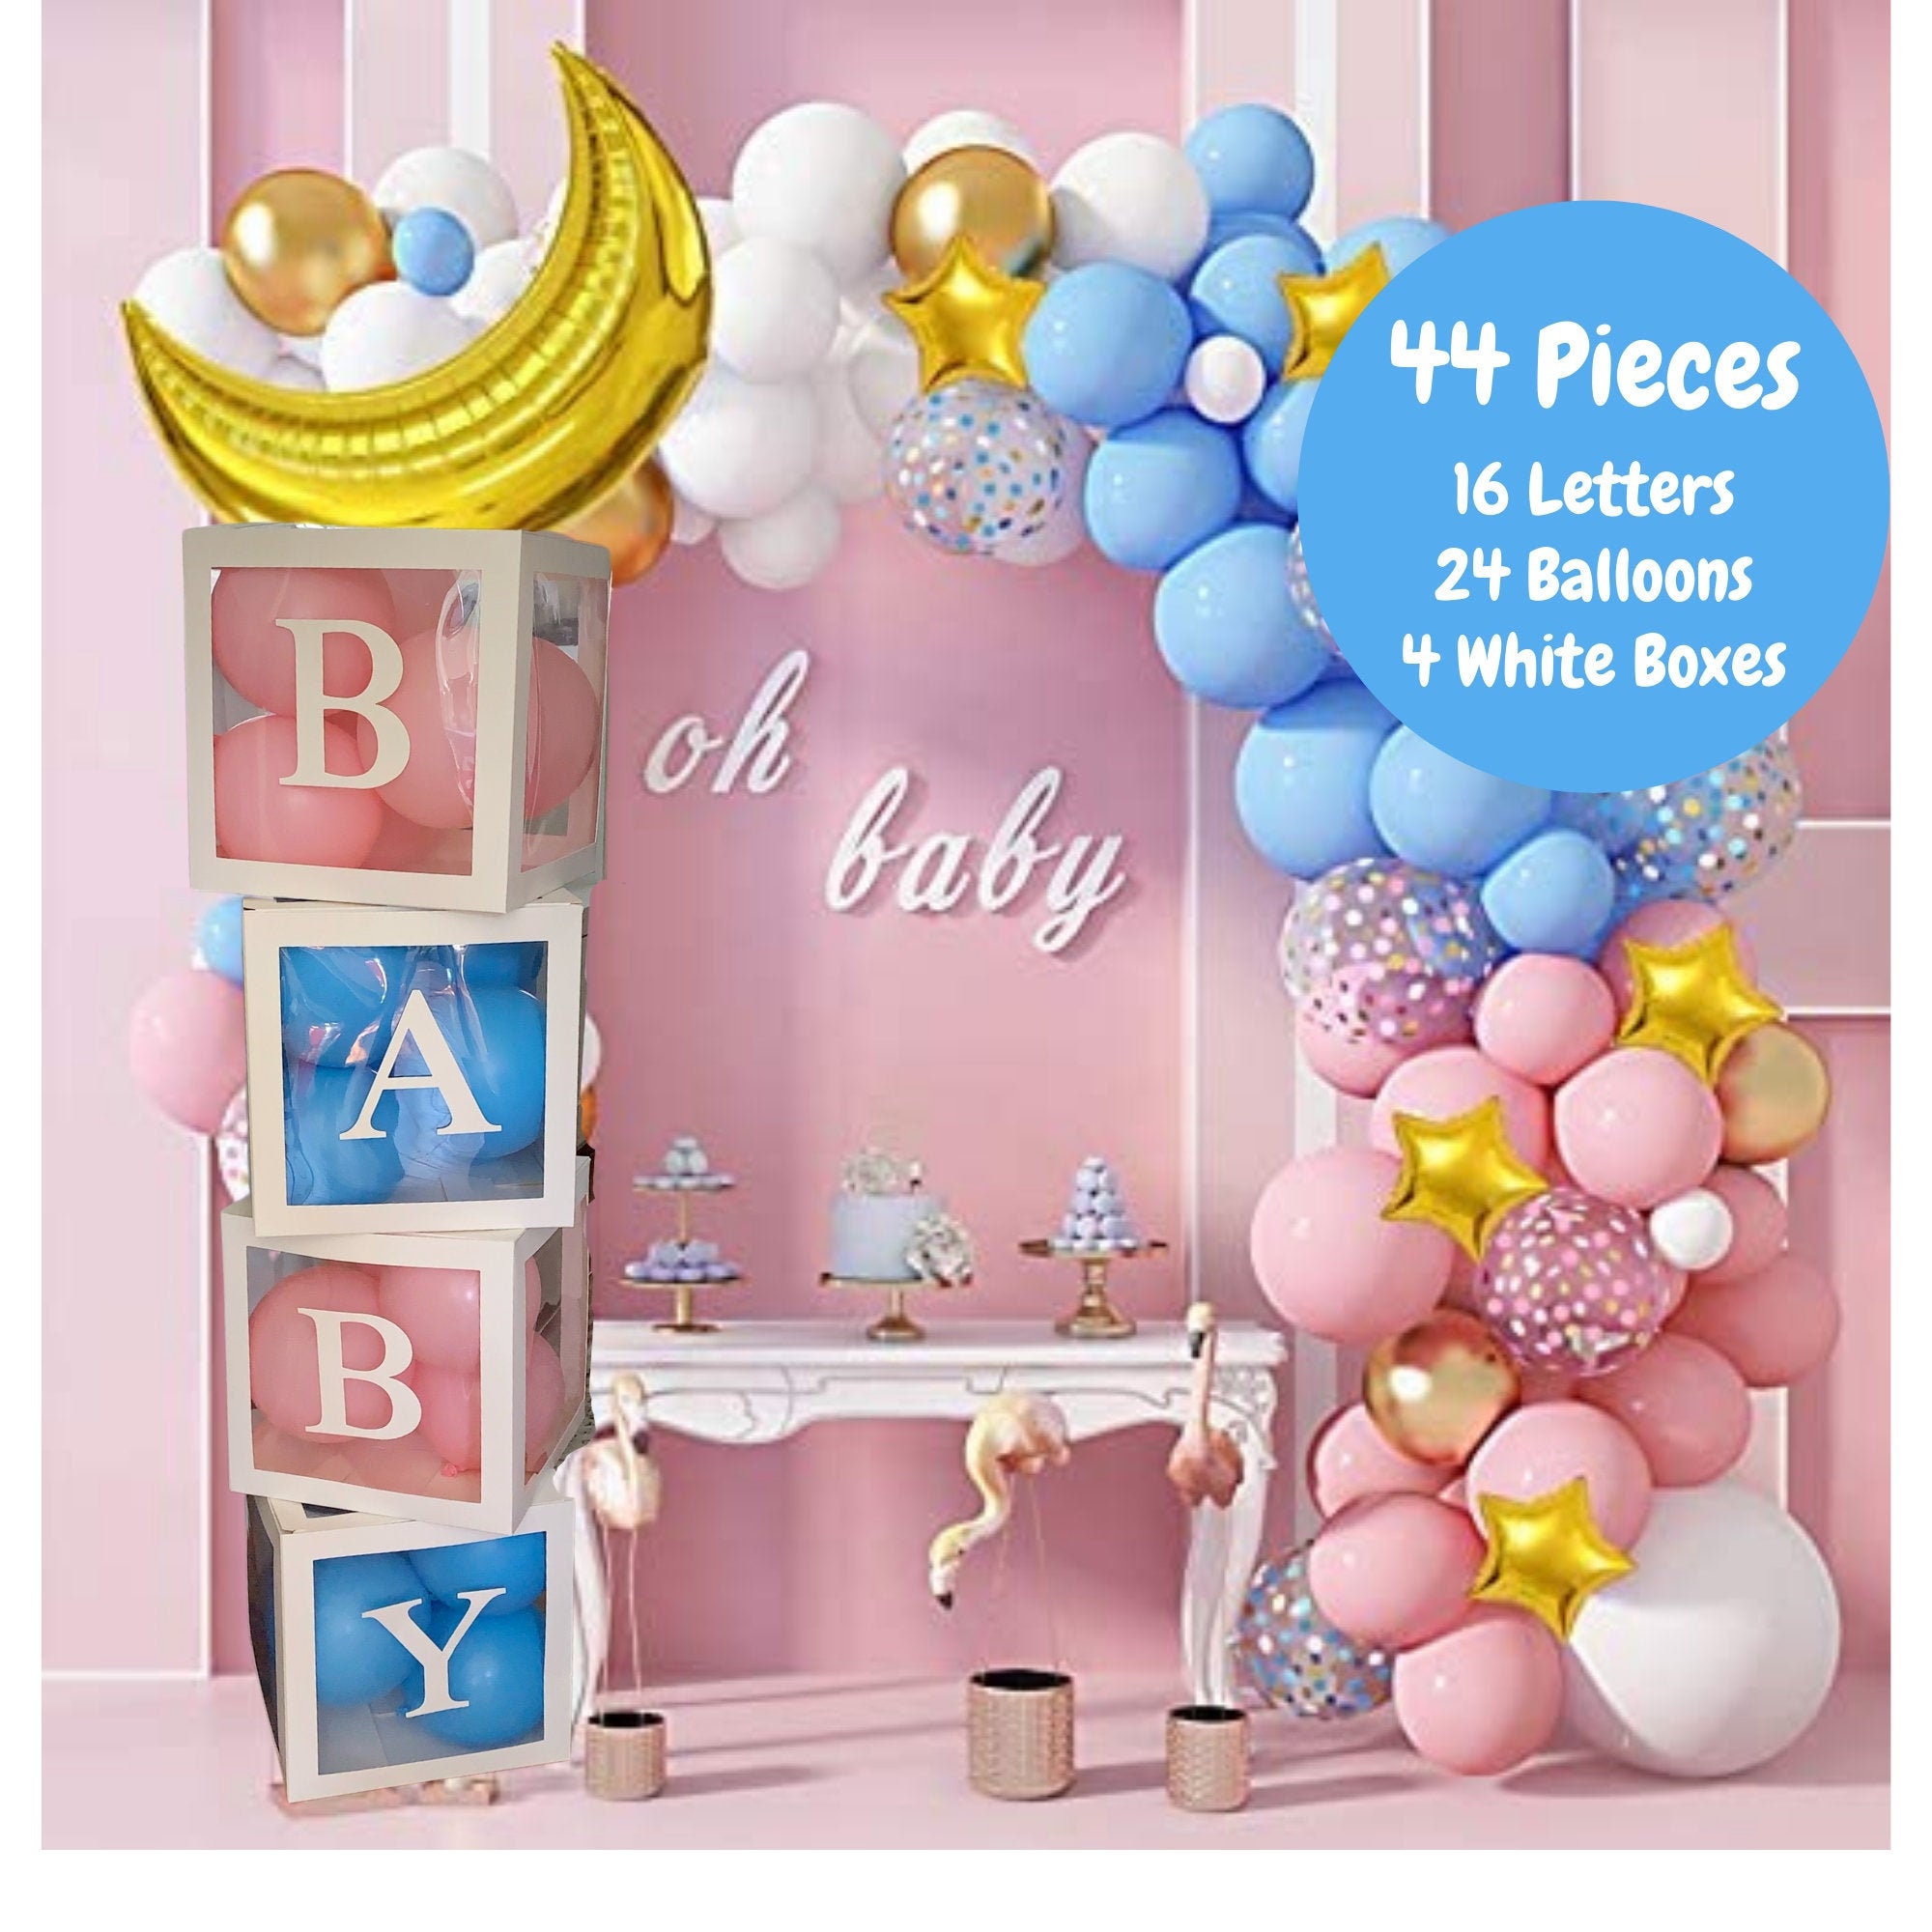 Floral Baby Shower Box Decorations for Girls, Baby Shower Backdrop Blocks Gender Reveal Photo Props,Floral Baby Shower Party Decorations Pink Girl